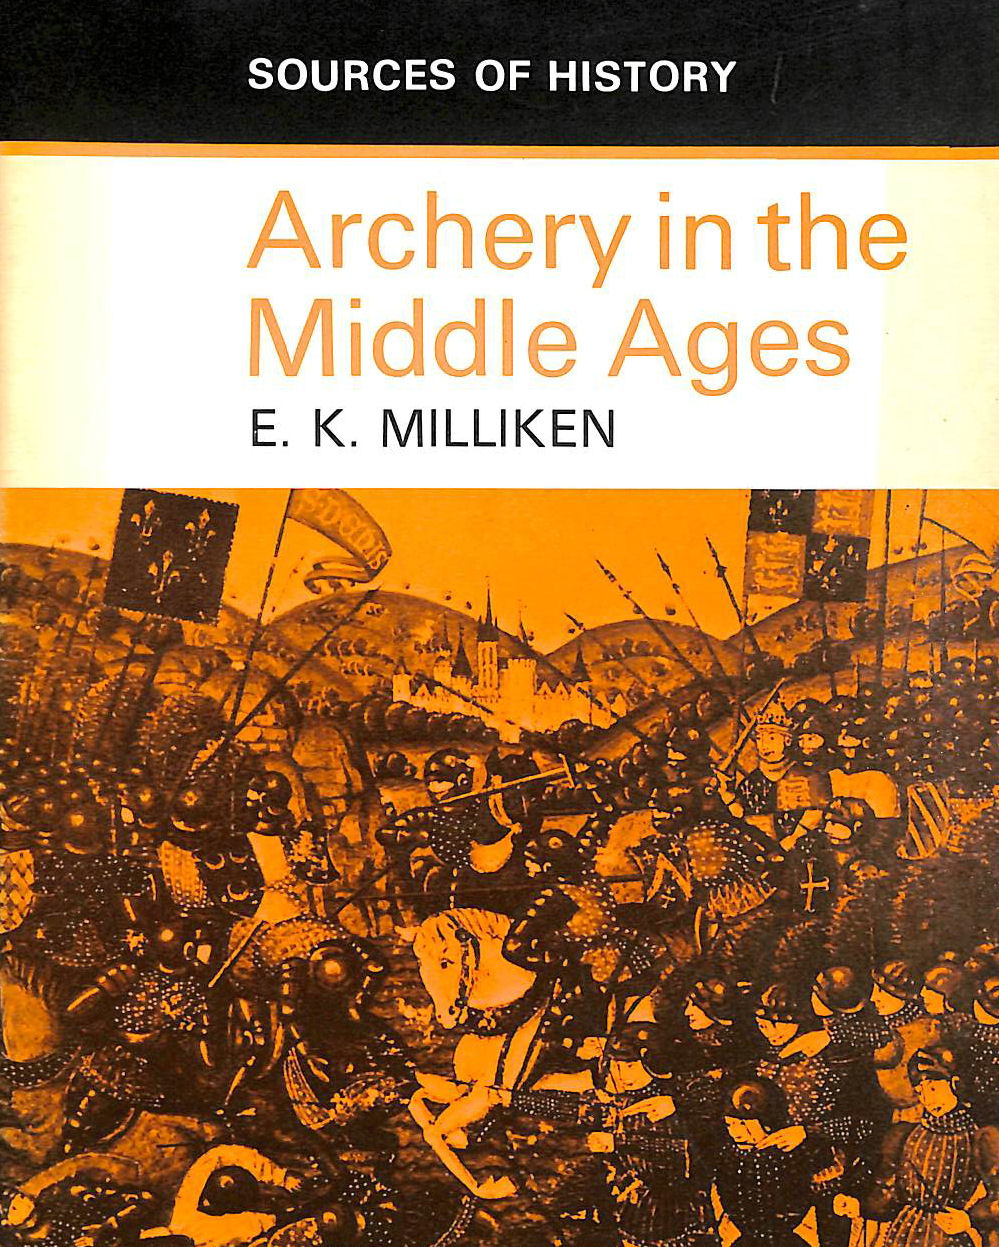 MILLIKEN, E.K. - Archery in the Middle Ages (Sources of History series)